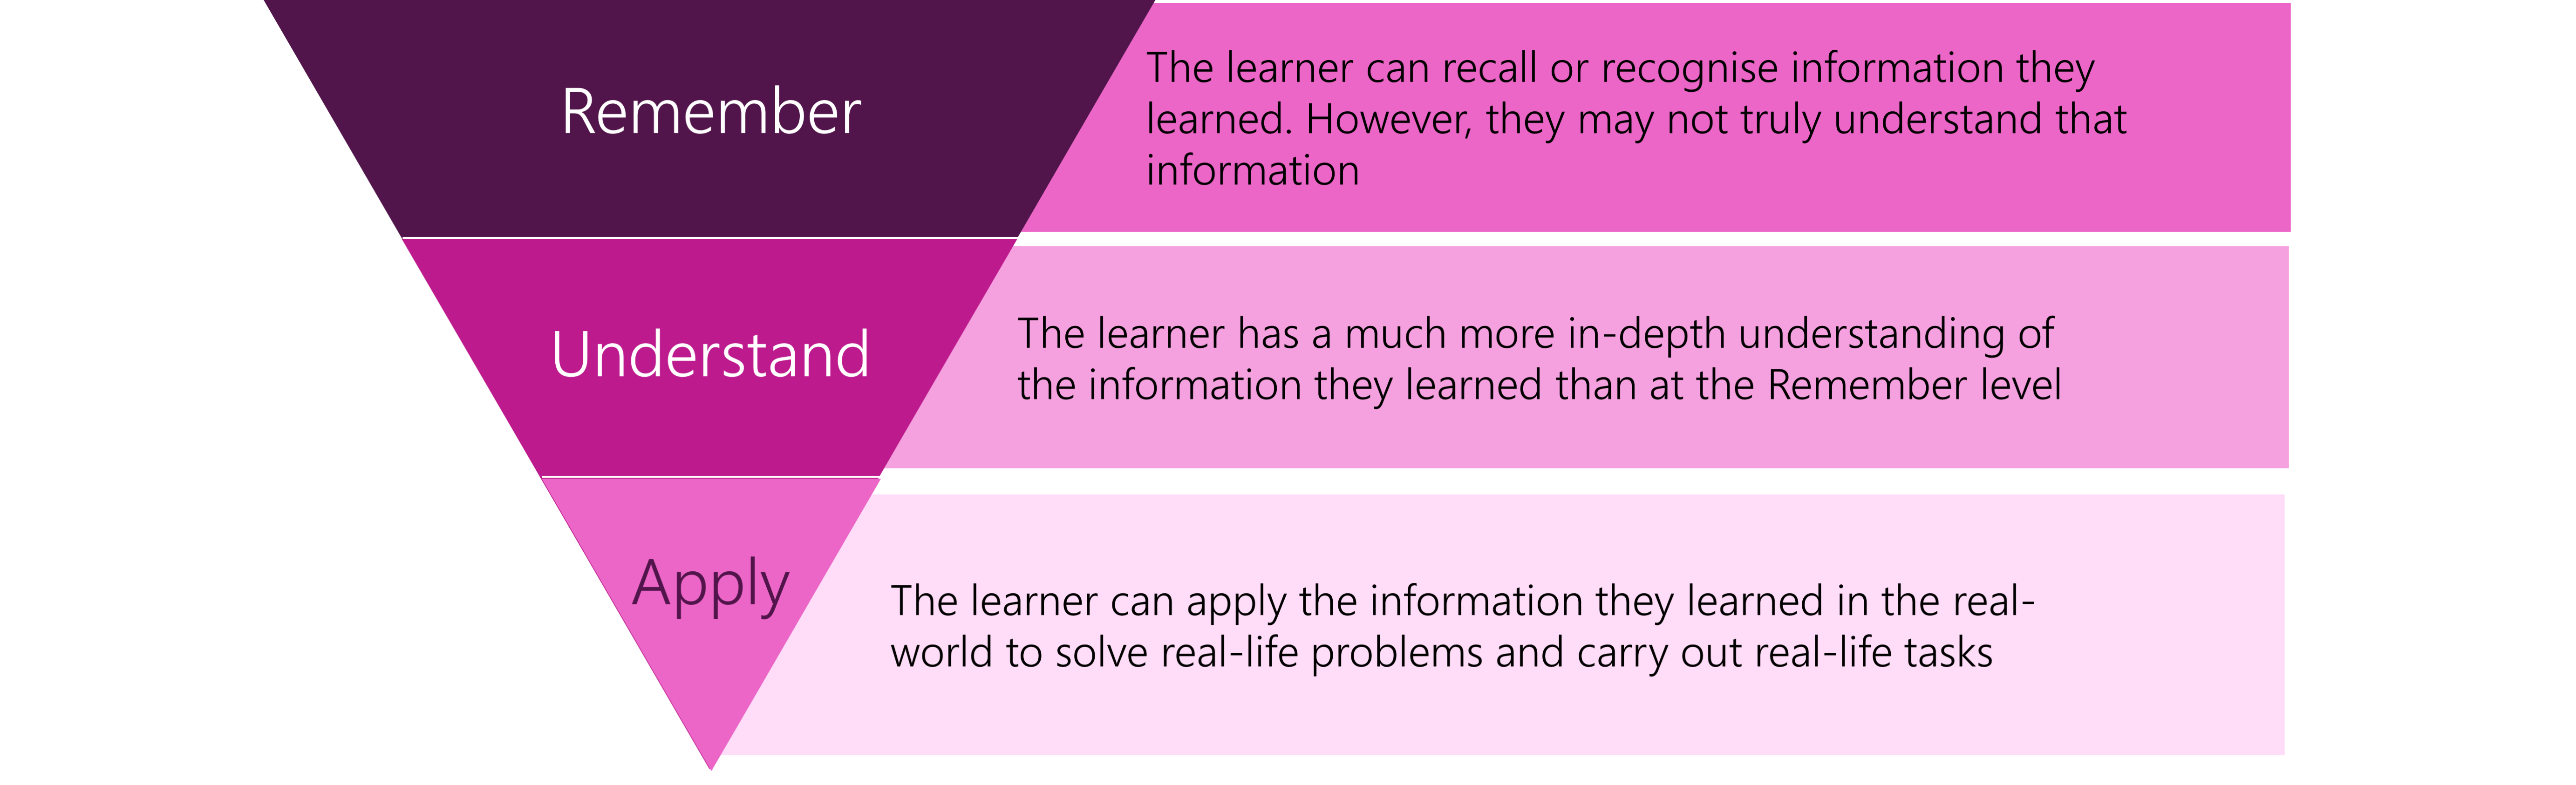 Remember: The learner can recall or recognise information they learned. However, they may not truly understand that information. Understand: The learner has a much more in-depth understanding of the information they learned than at the Remember level. Apply: The learner can apply the information they learned in the real-world to solve real-life problems and carry out real-life tasks